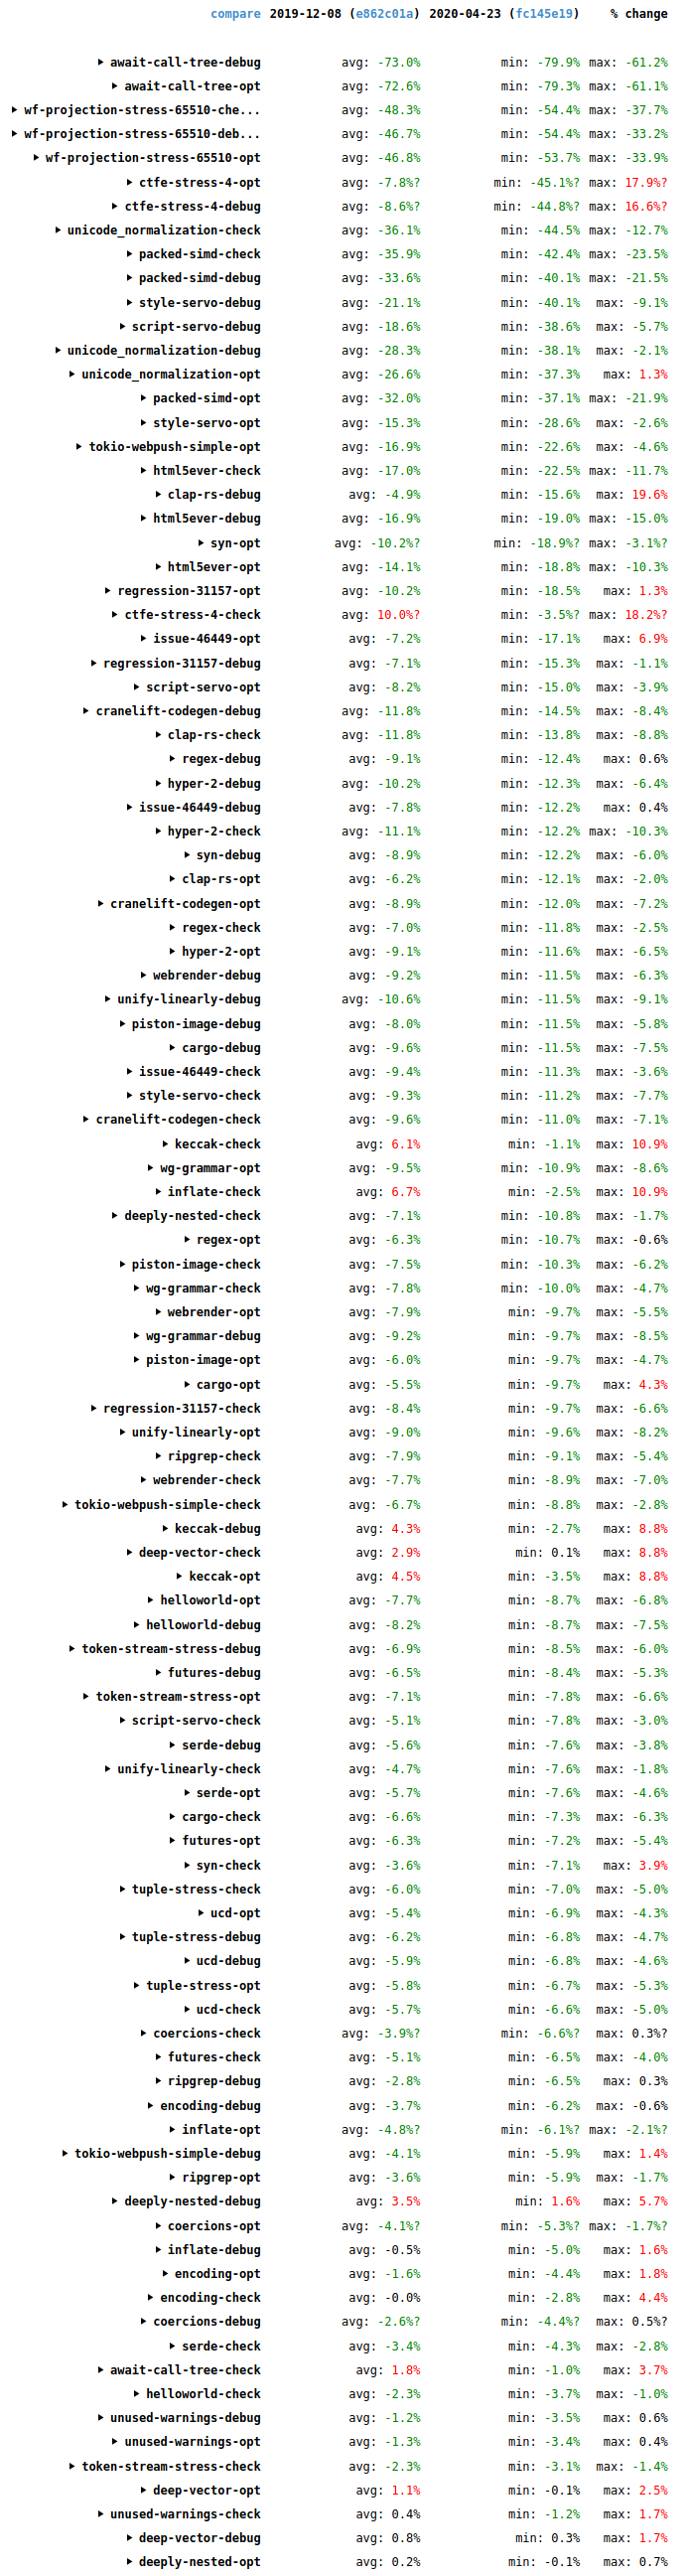 Table of compiler performance results.